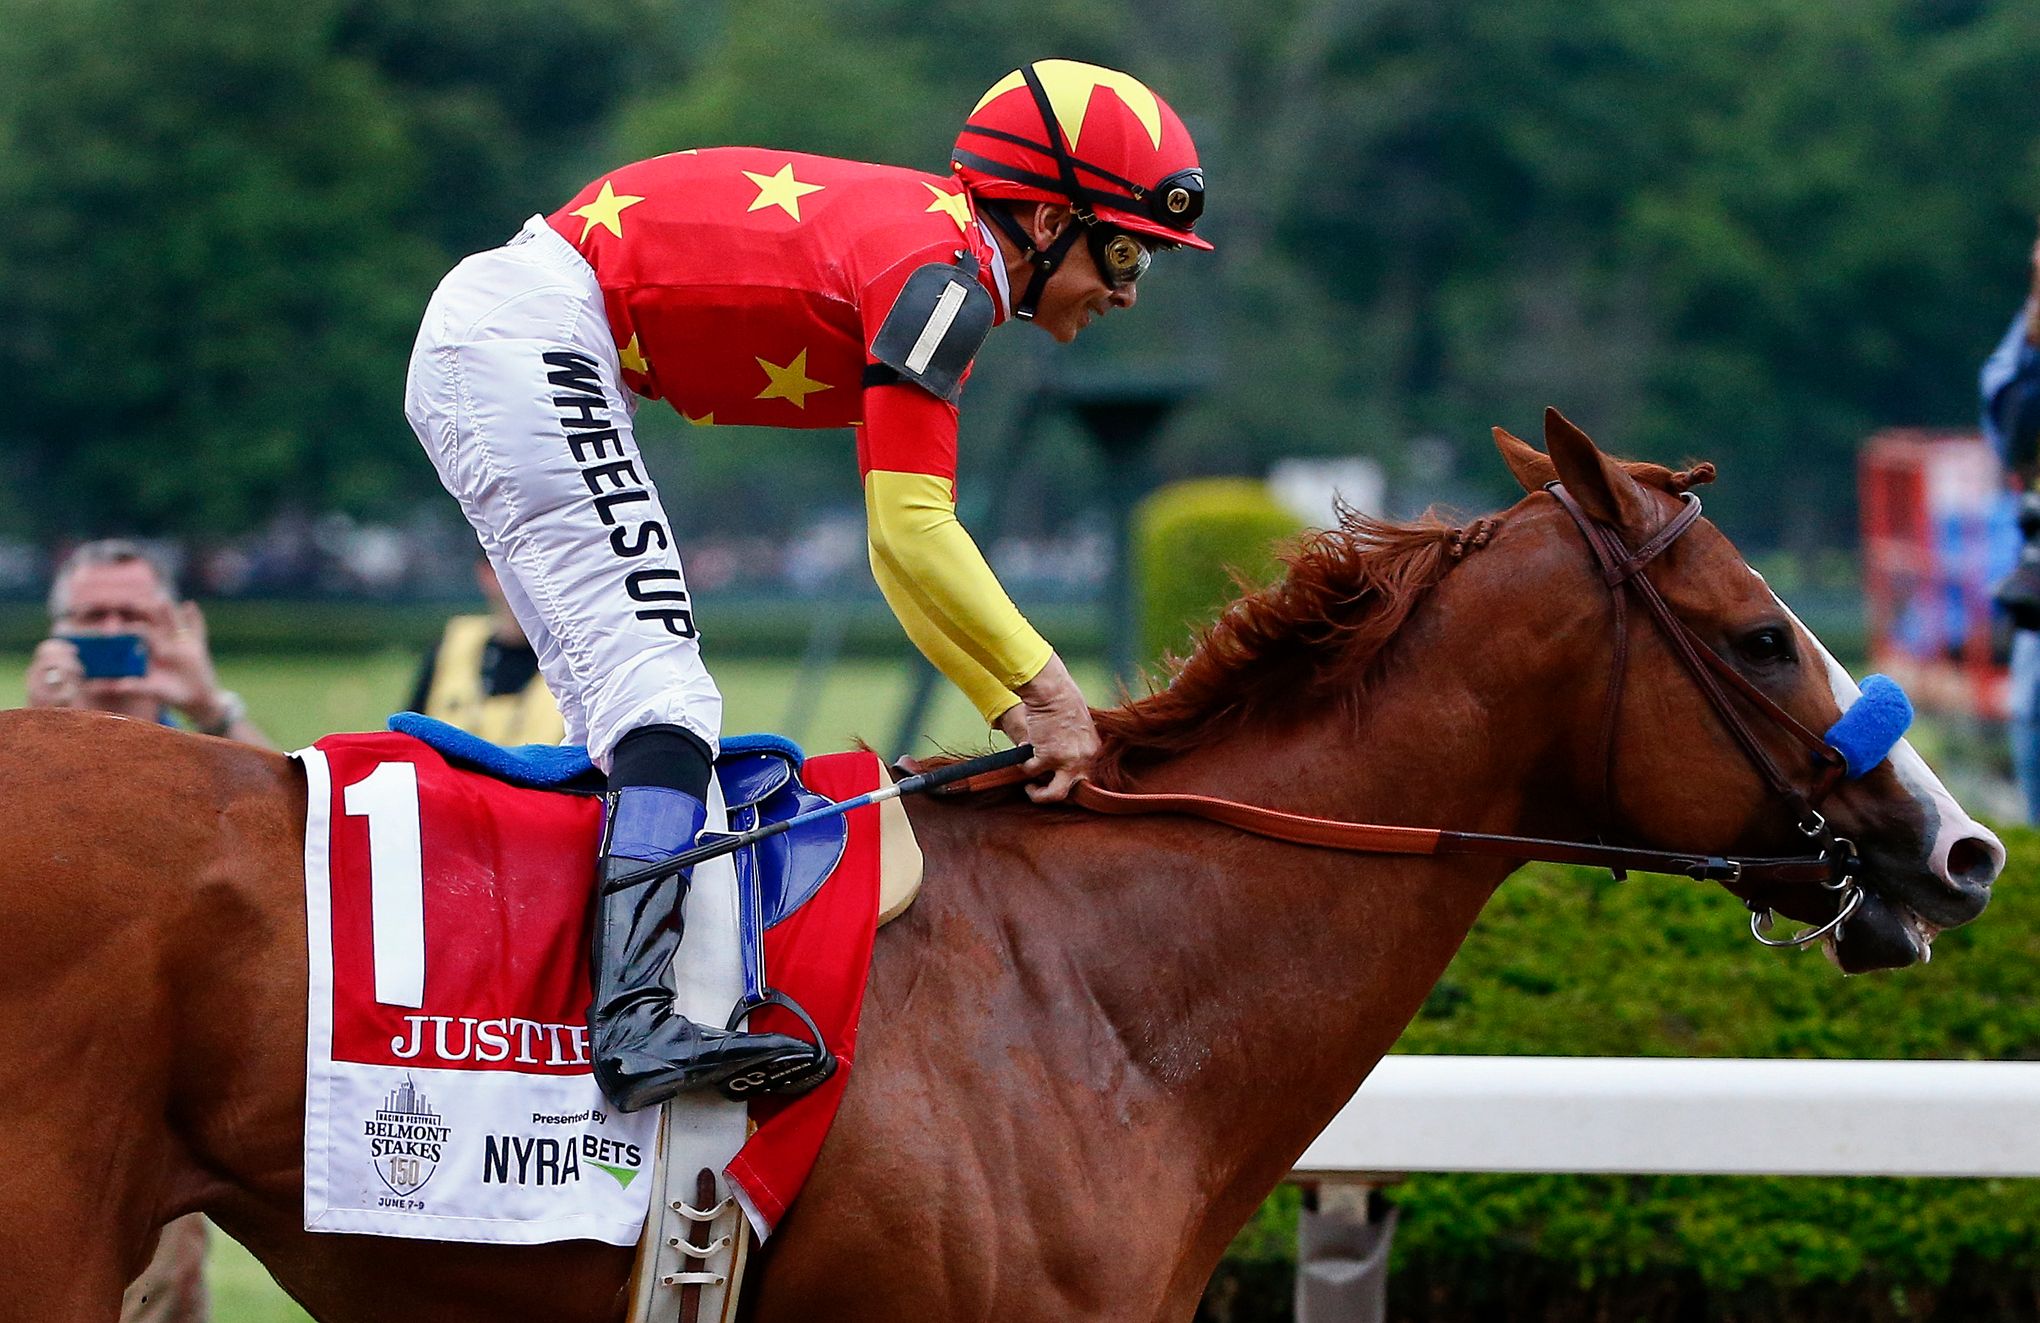 Mike Smith, whose career almost ended after scary injury, becomes oldest  jockey to win Triple Crown – New York Daily News